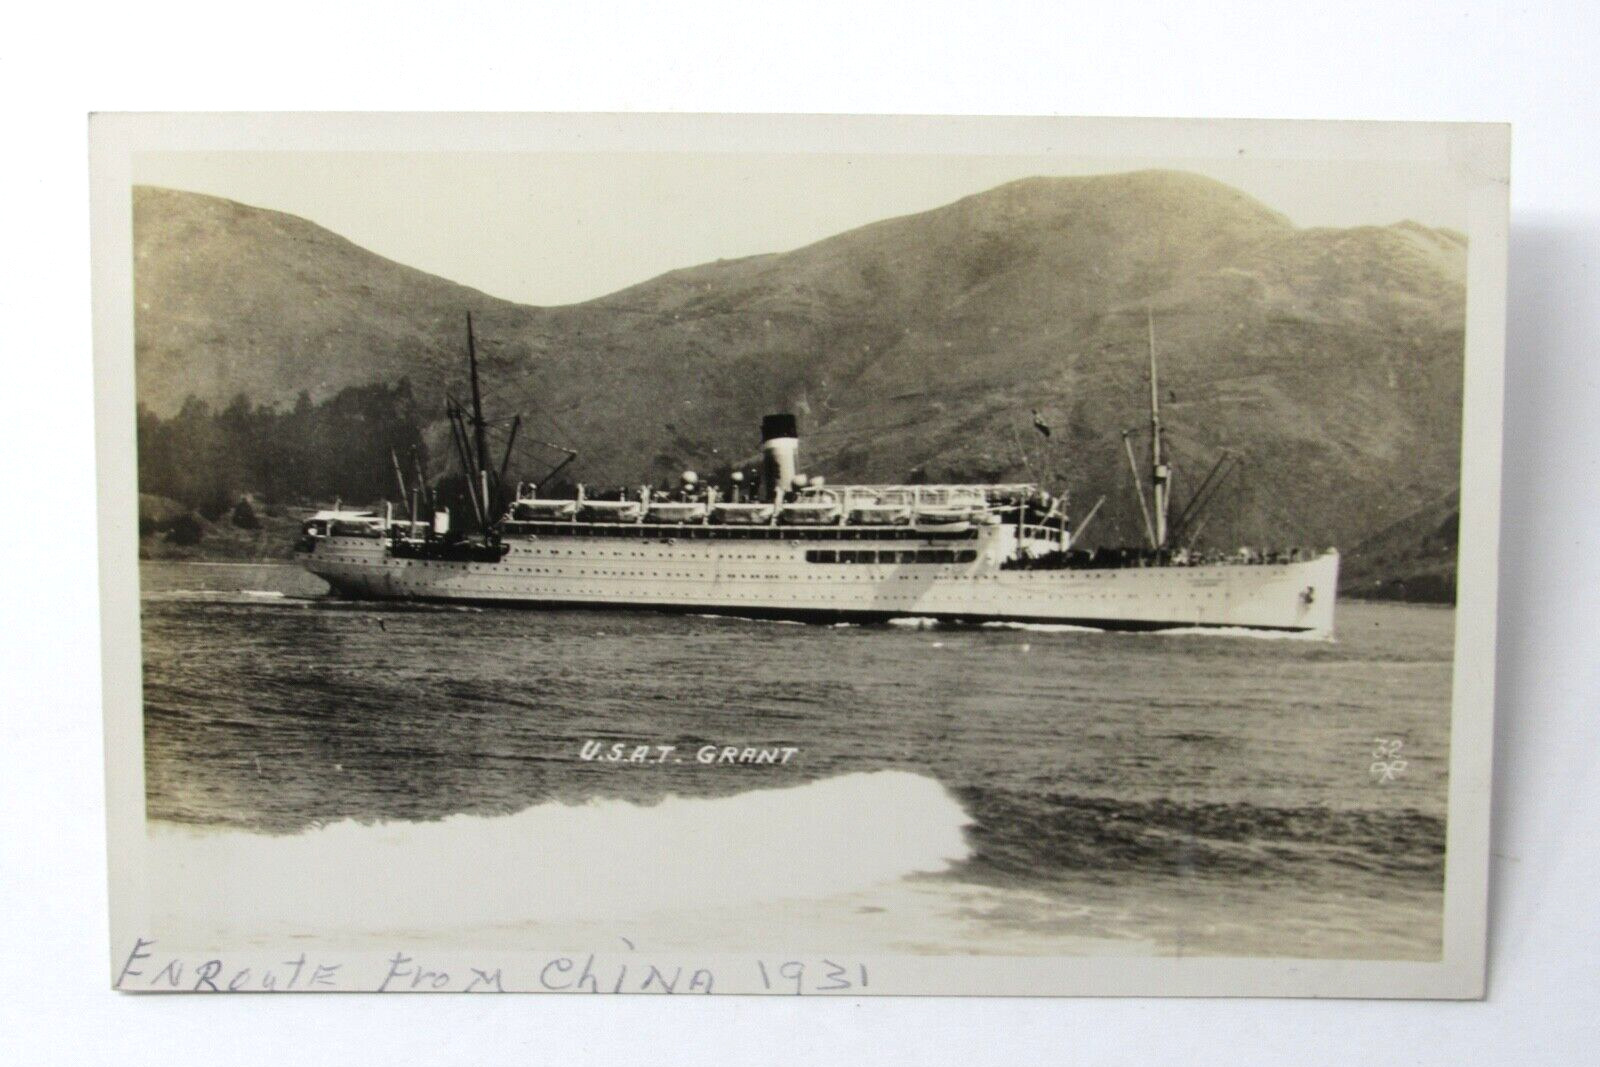 U.S. Army Transport Ship USAT Grant Enroute from Philippines China Postcard 1931